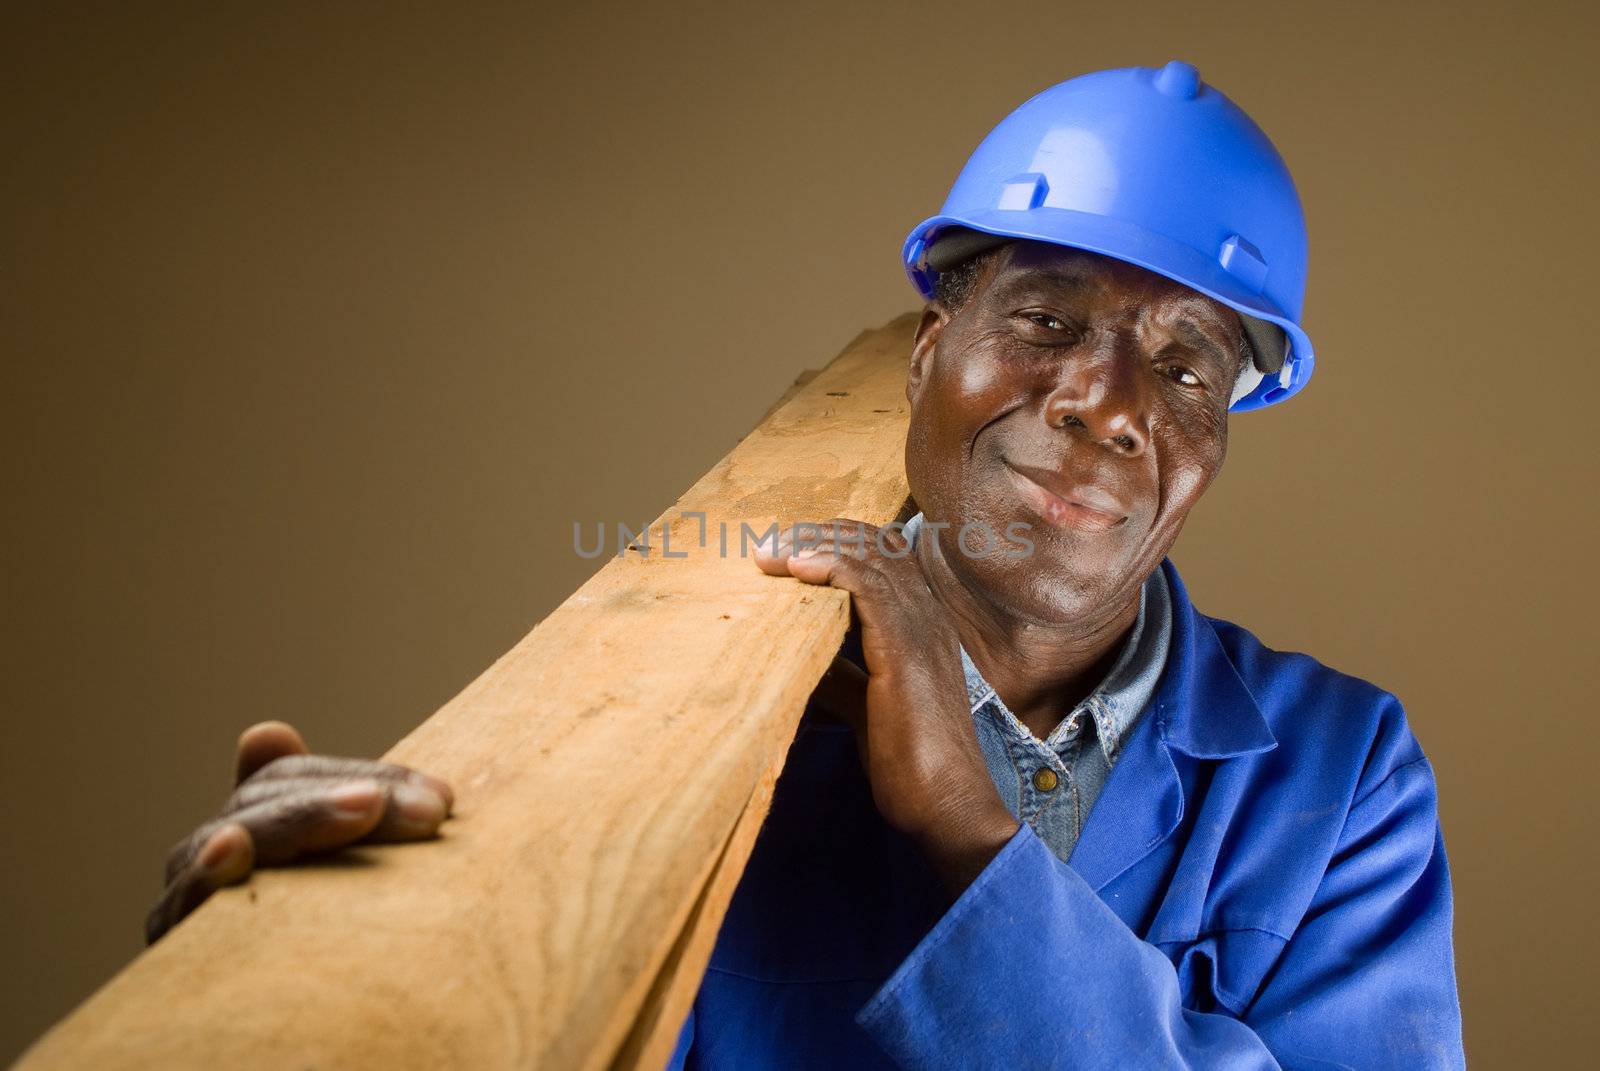 Senior African Worker by alistaircotton